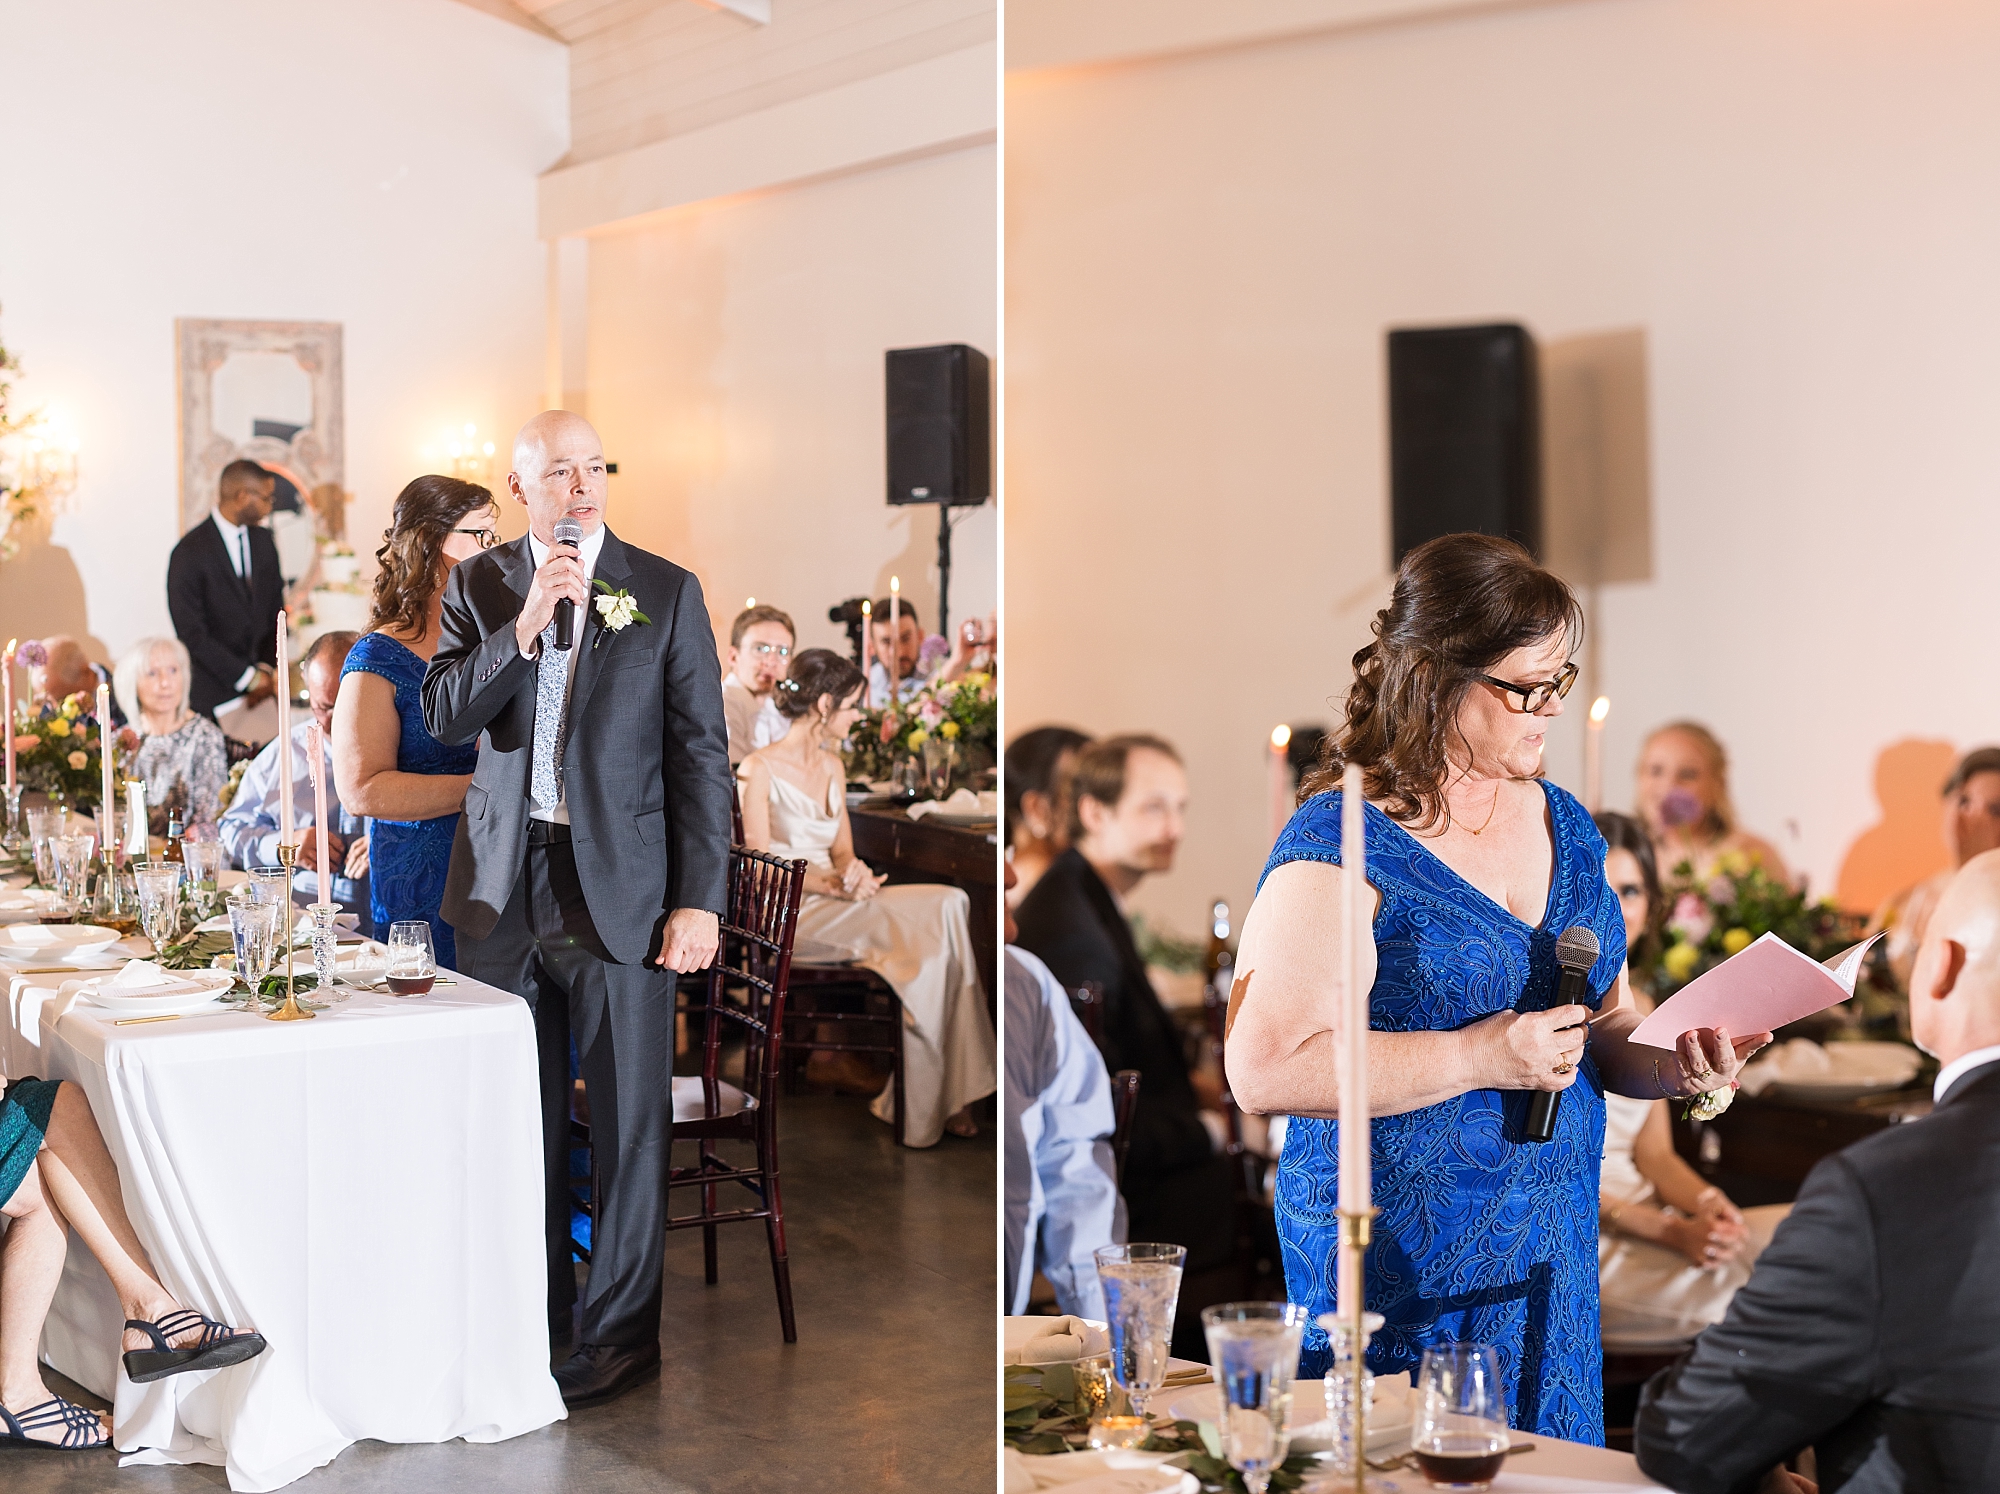 The parents of the bride make a toast to the bride and groom  | Merrimon Wynne Wedding | Sarah Hinckley Photography | Raleigh NC Wedding Photographer